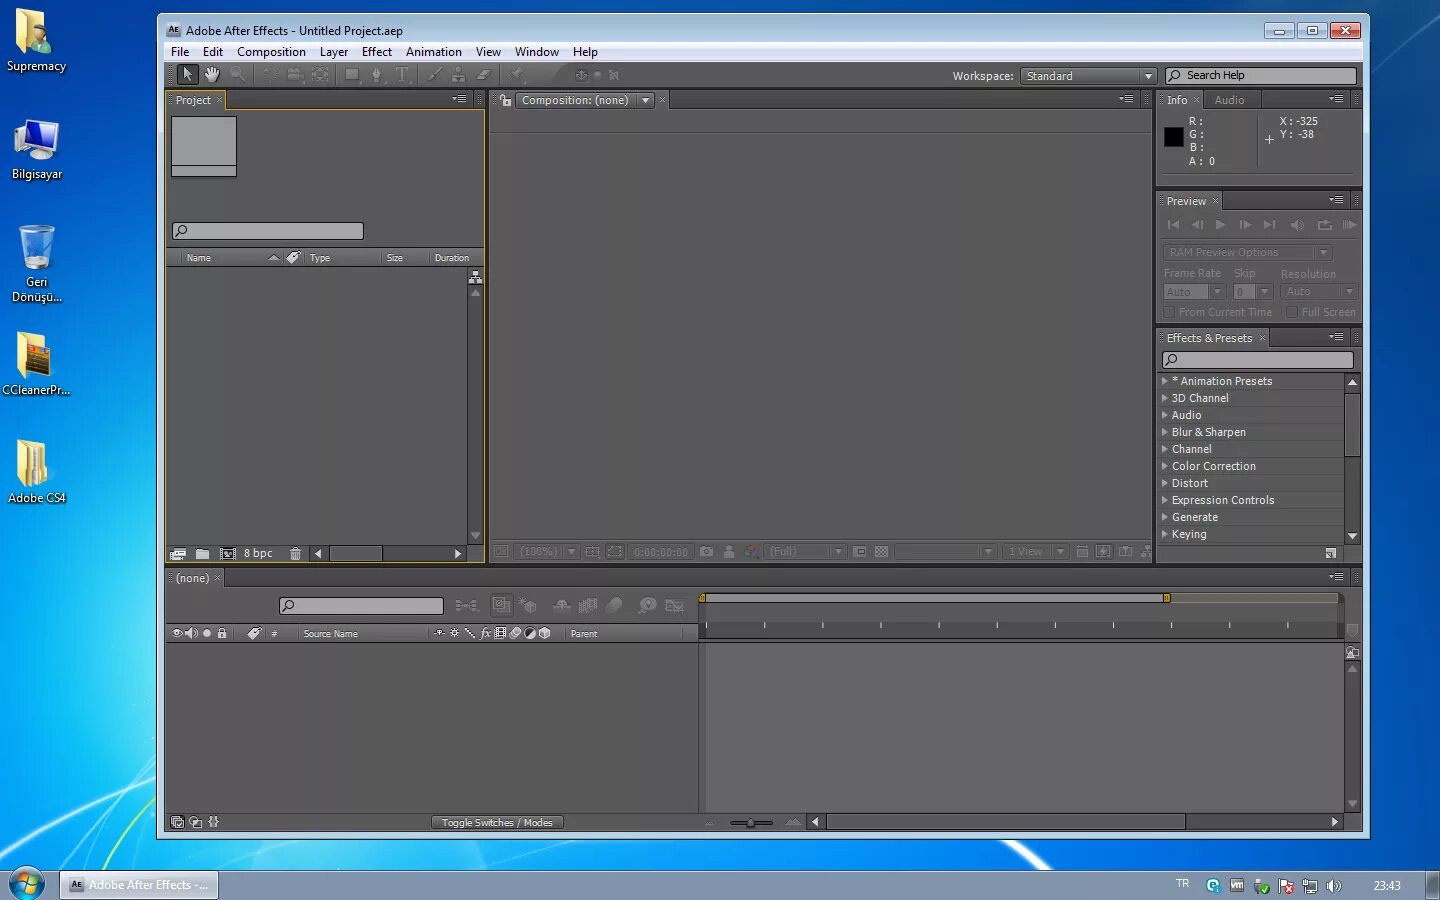 After effects keying. Adobe after Effects. Adobe after Effects cs5. Ключи after Effects. Автор эффект программа.